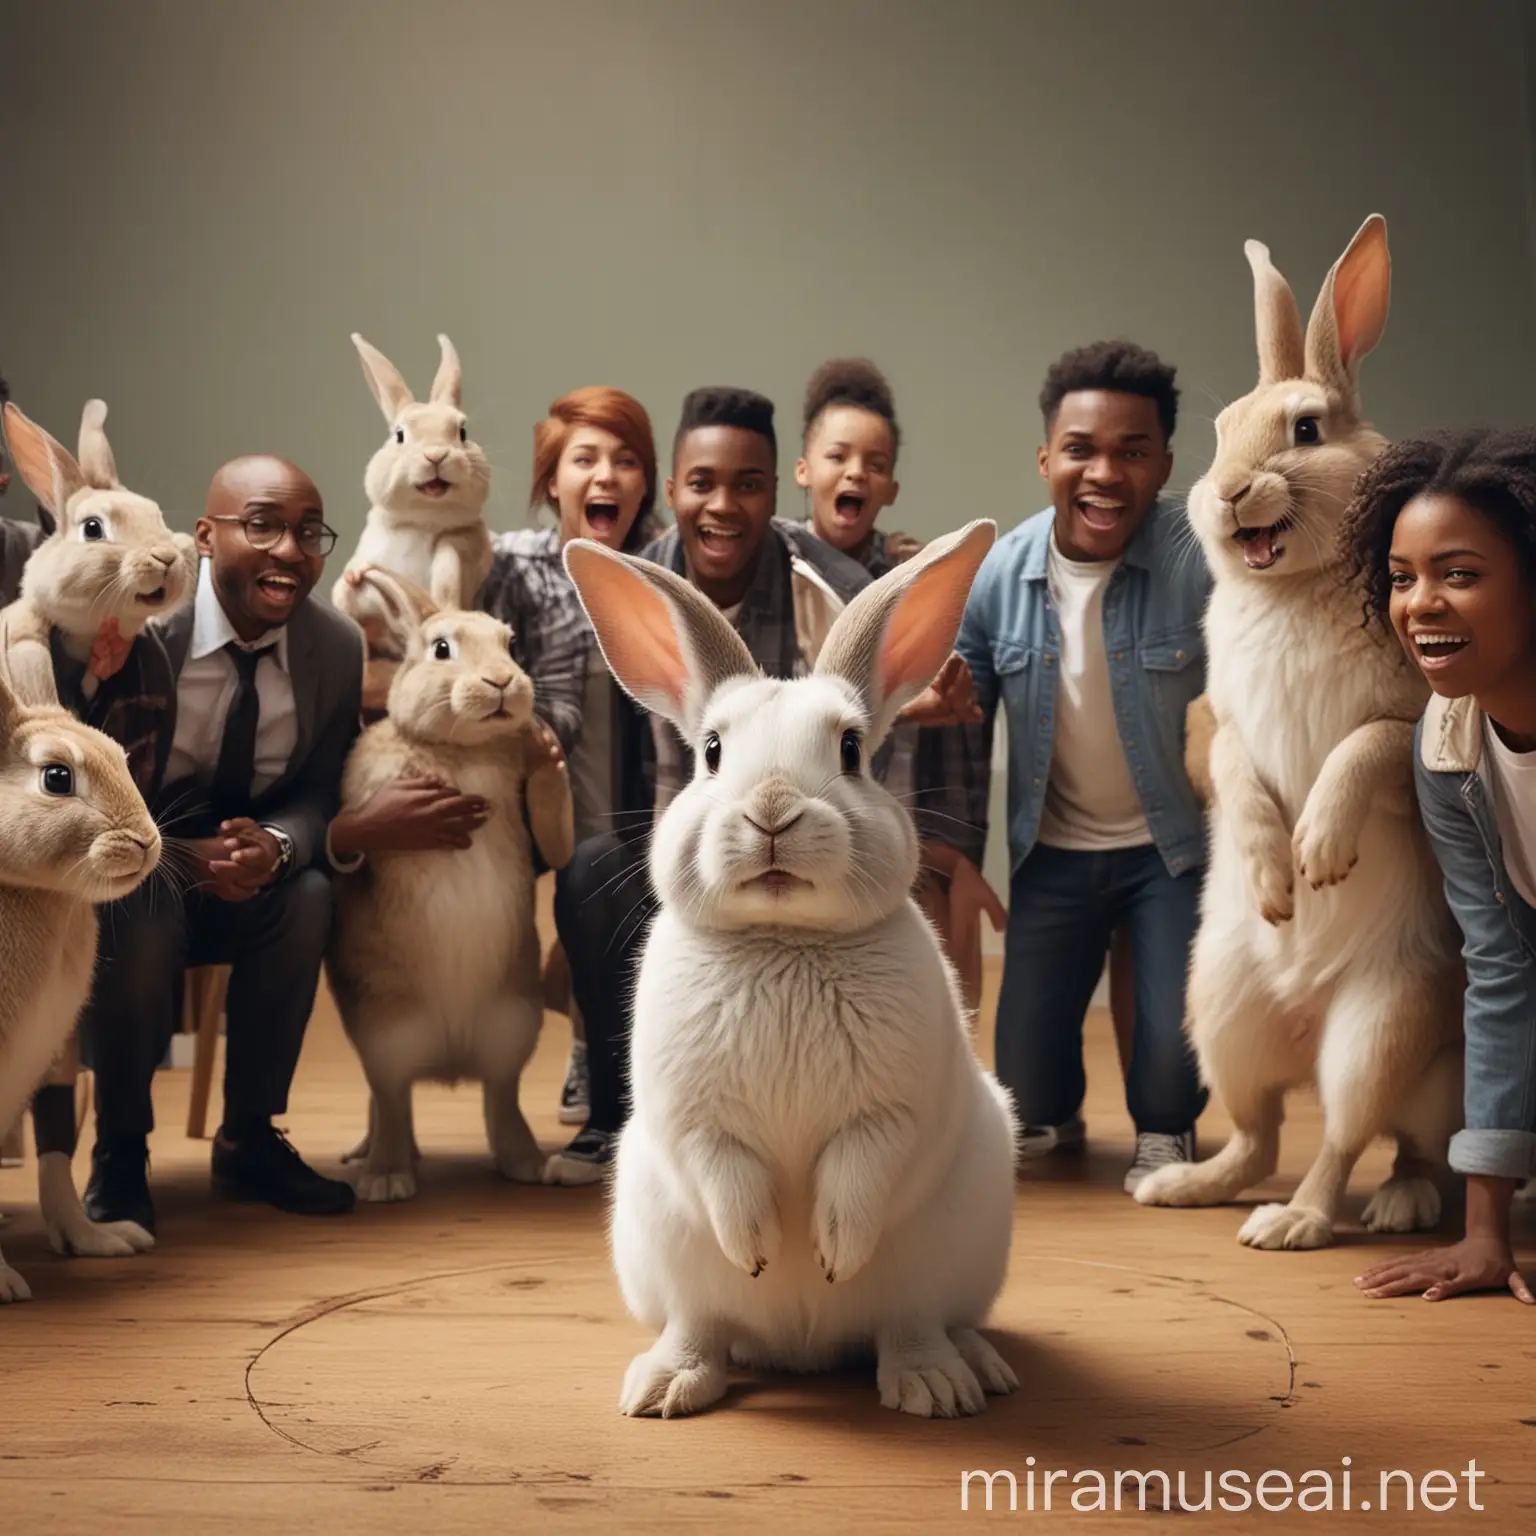 a rabbit looking sad in a circle with a group of black people behind it pointing and laughing with bad intentions 